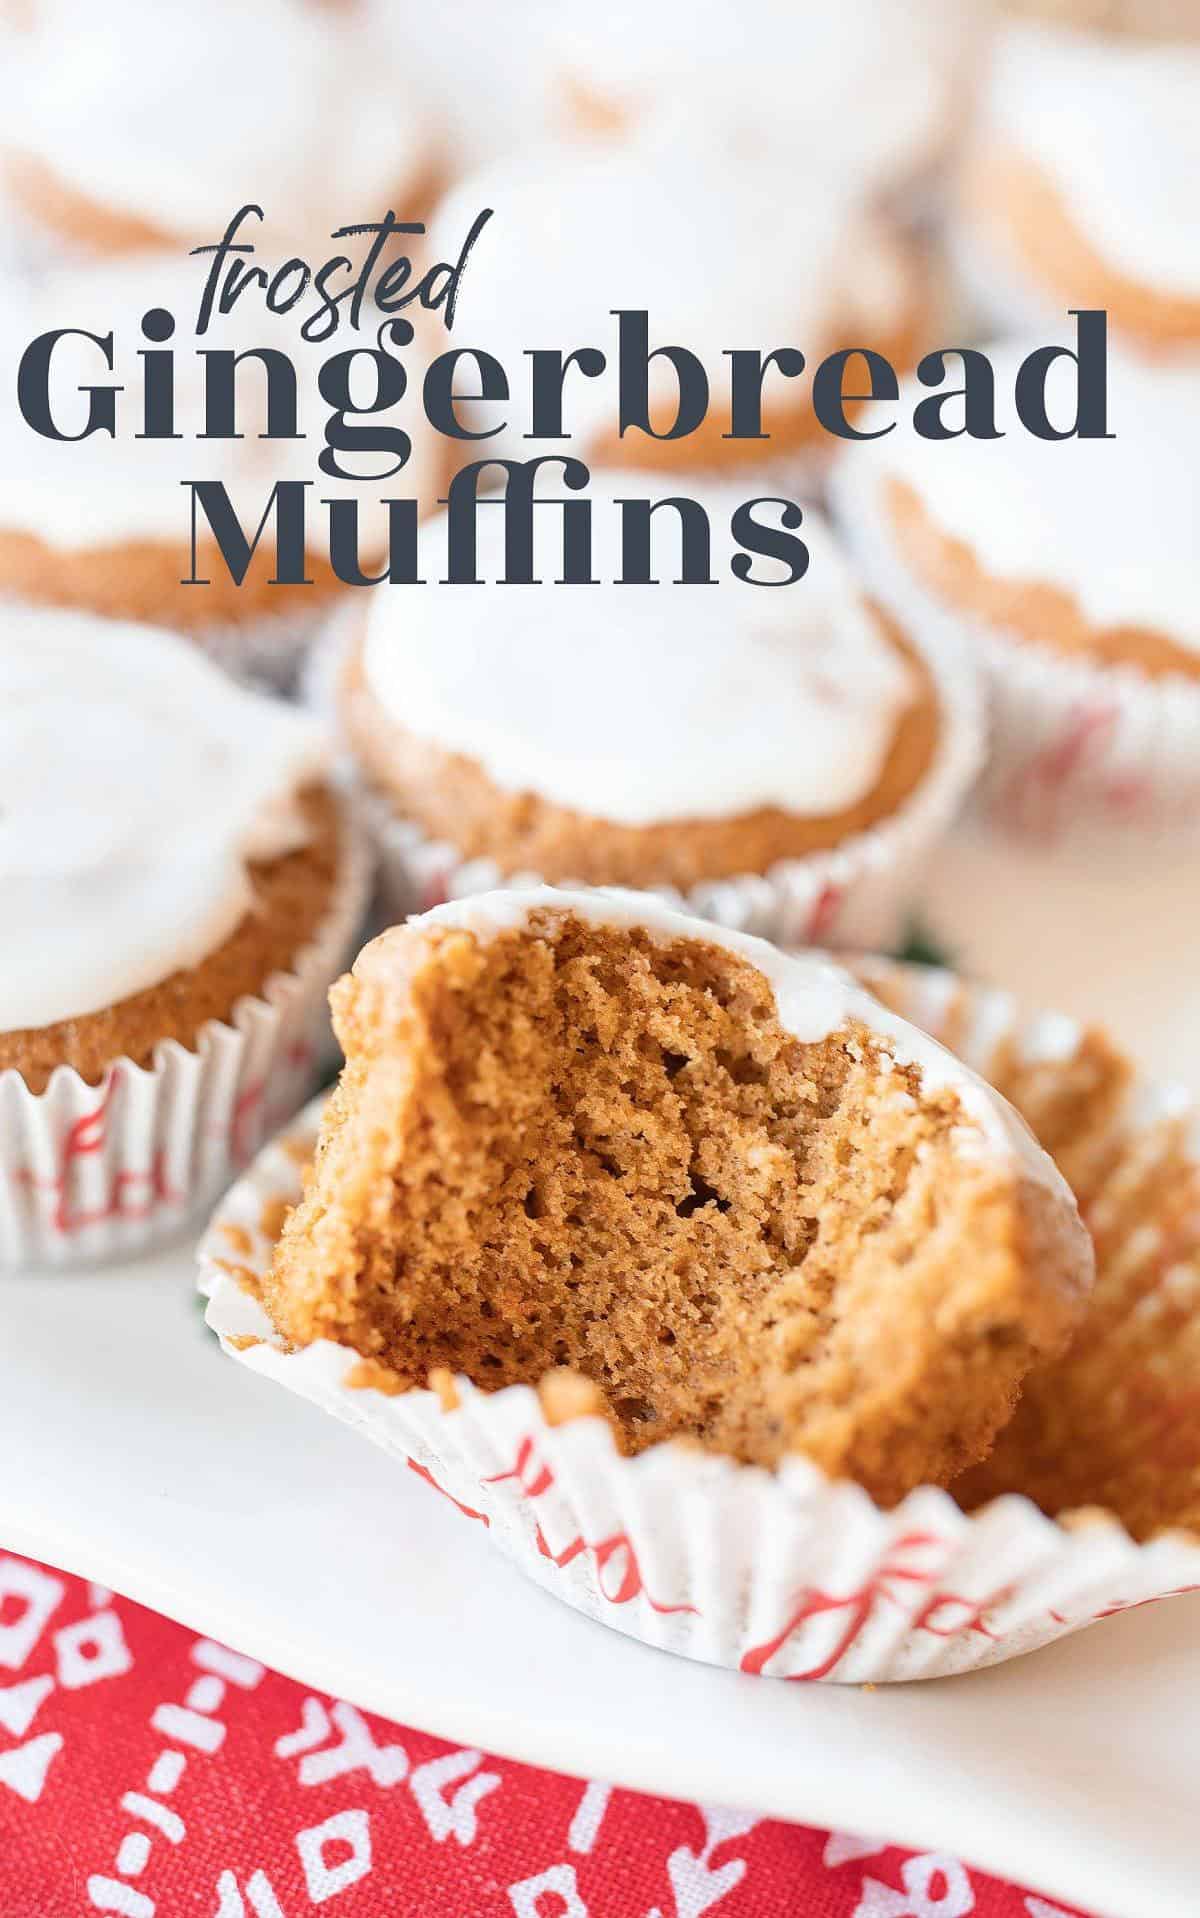  Don't be fooled by the name, these muffins are perfect for any time of day.